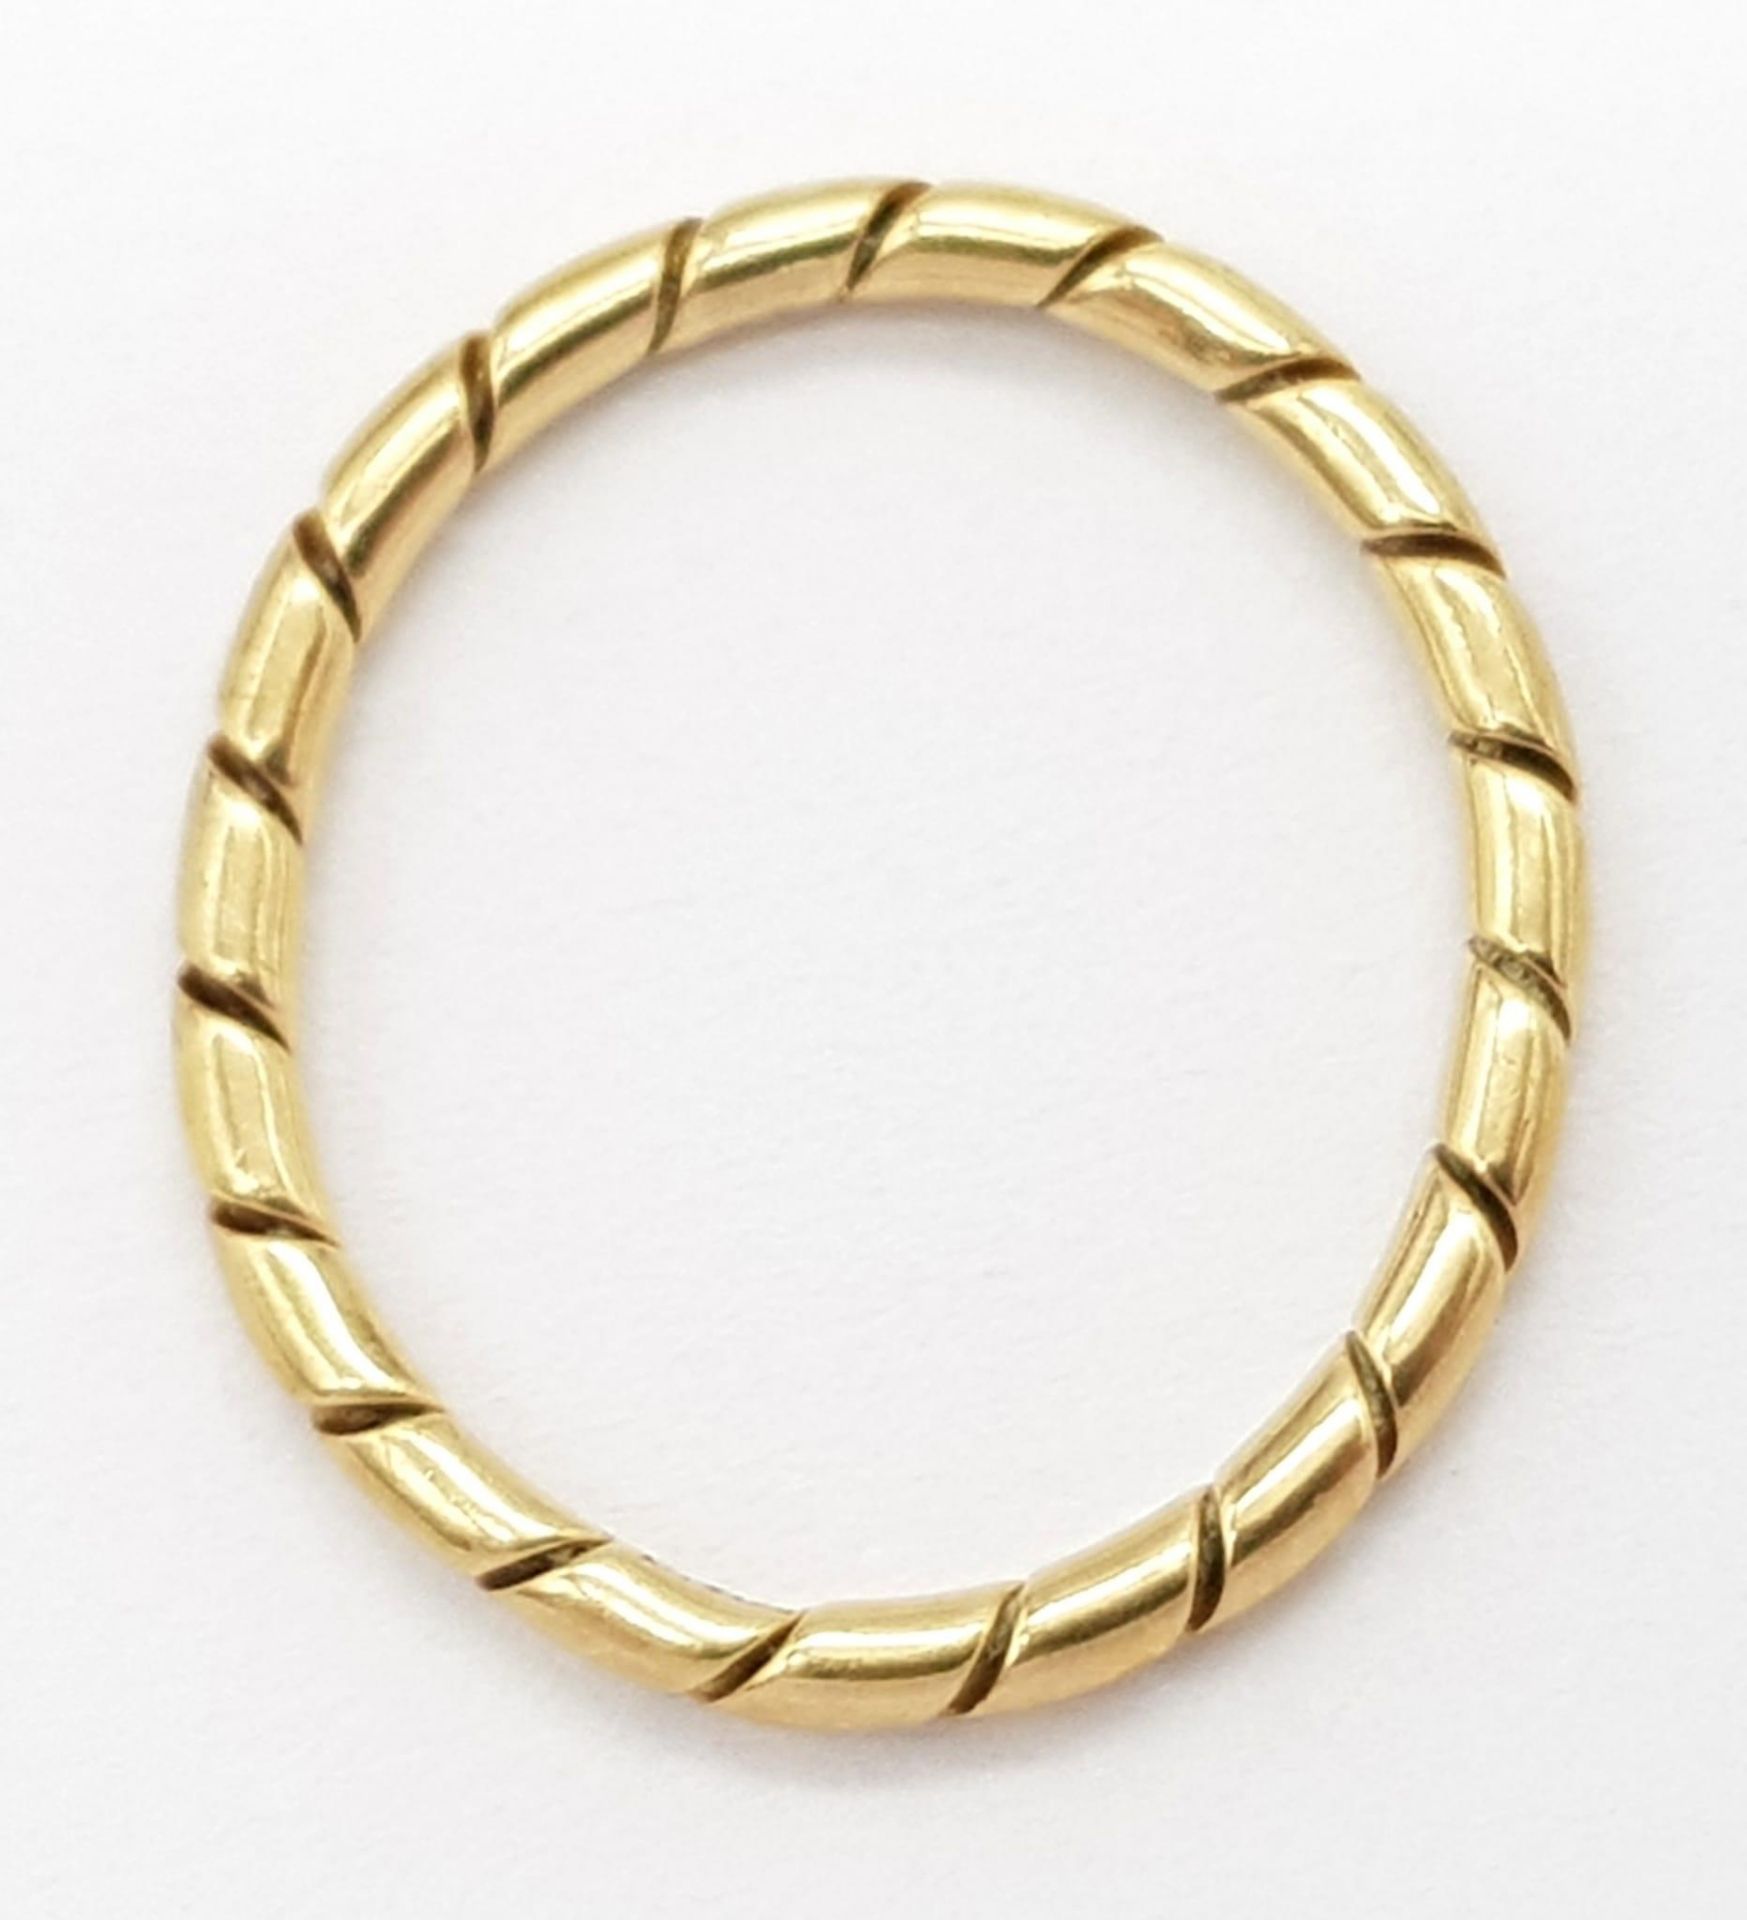 A Vintage 9K Yellow Gold Thin Band Ring with Diagonal Ridged Design. Size K. 1.33g. 2mm - Image 3 of 4